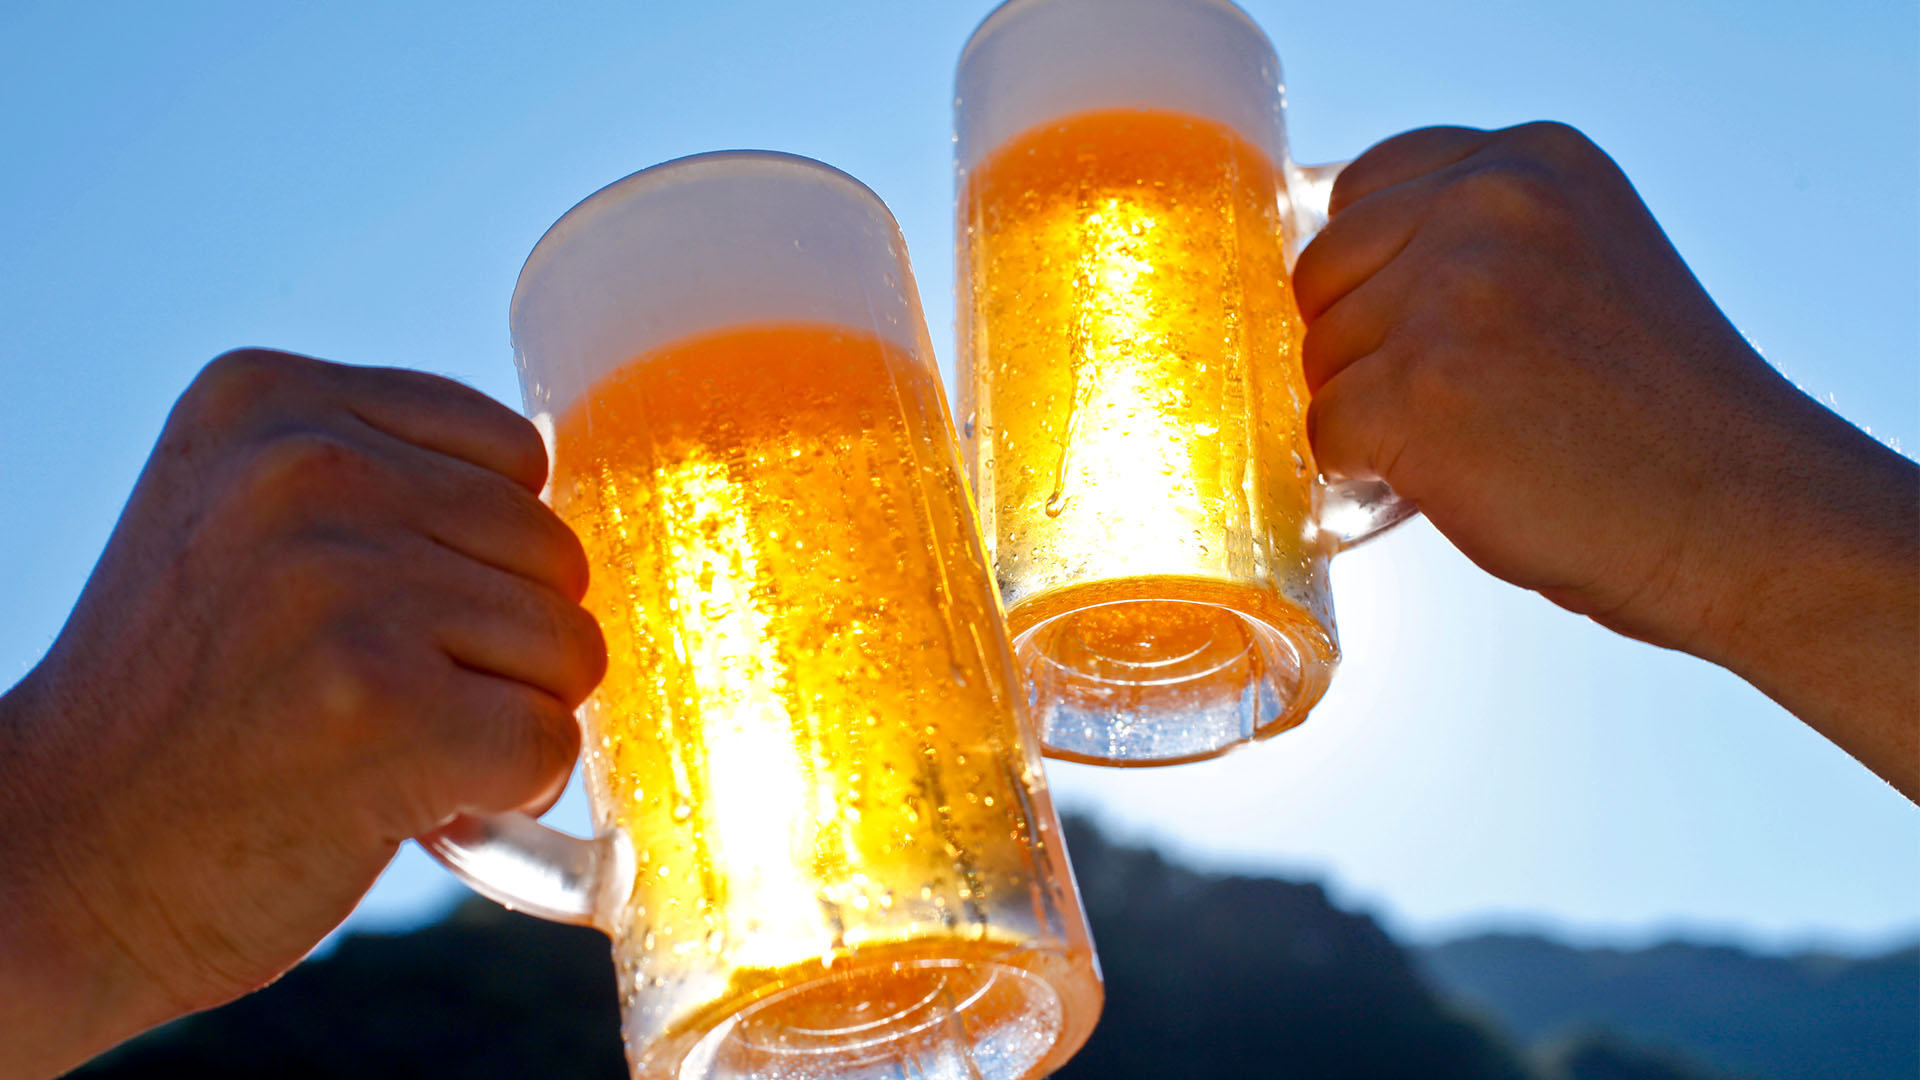 Drinking beer in moderate amounts ‘could lower your risk of dementia and brain decline’